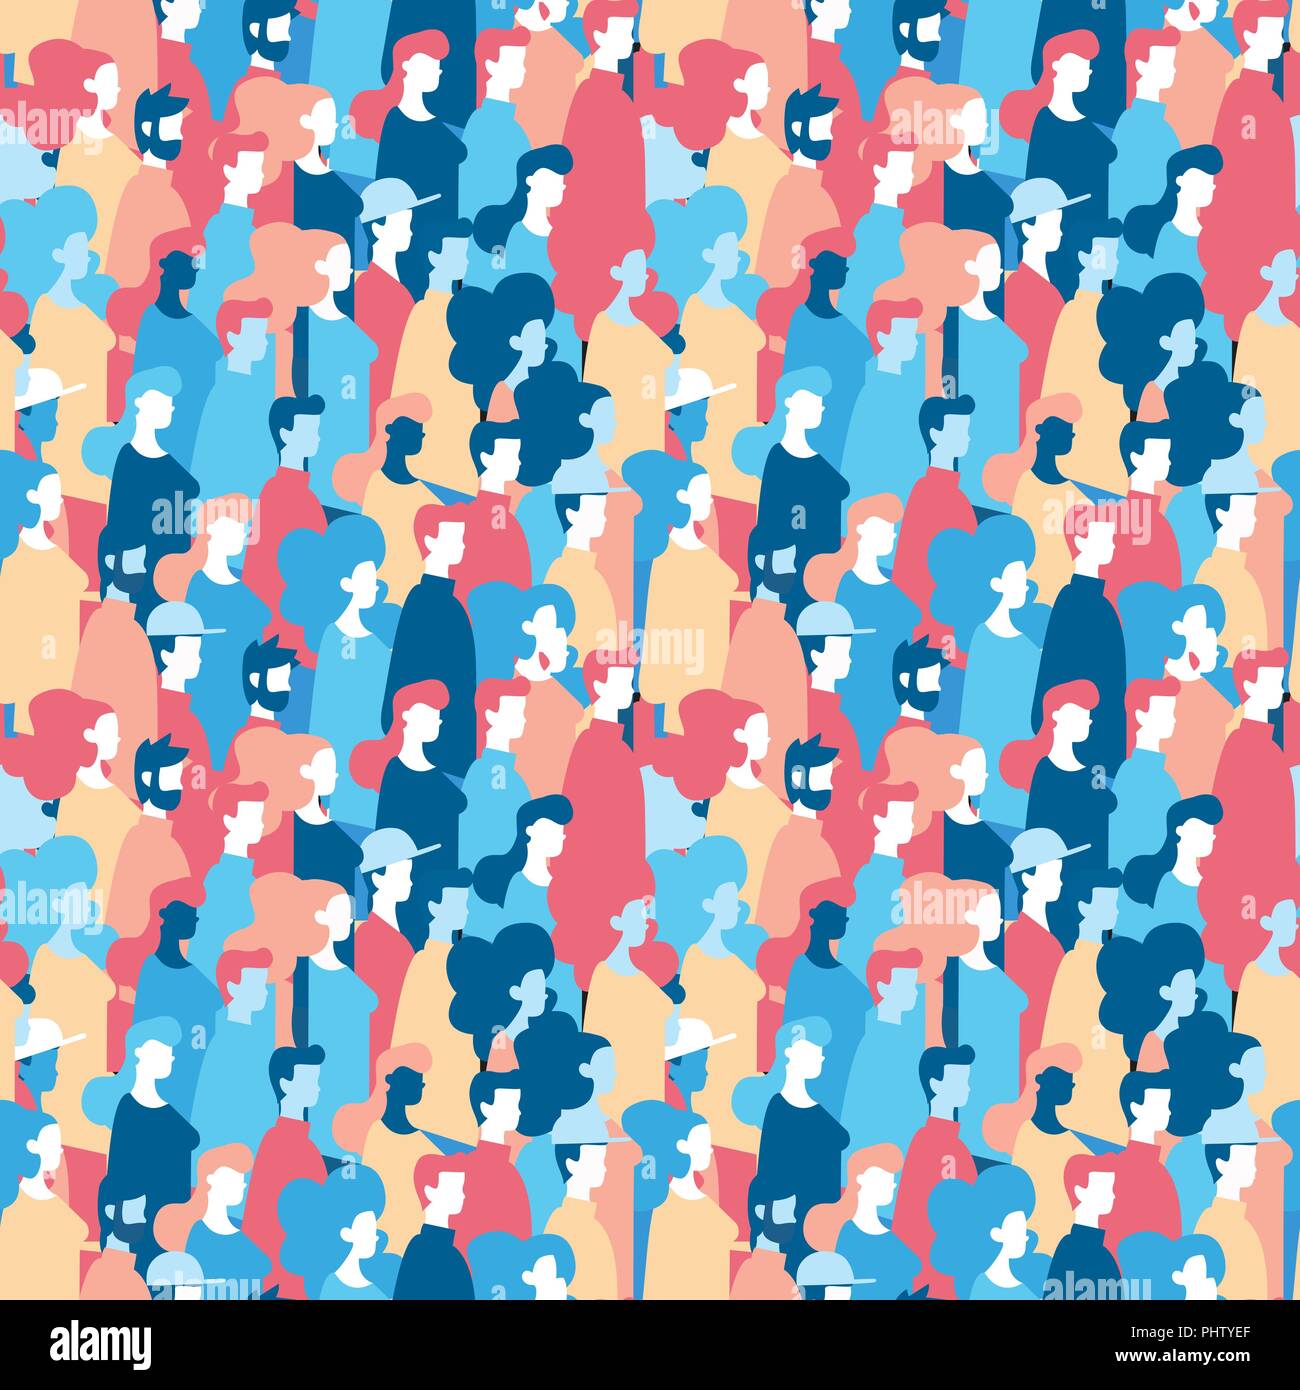 Social community seamless pattern of diverse people group in modern style, colorful crowd loop background with mixed men and women. EPS10 vector. Stock Vector